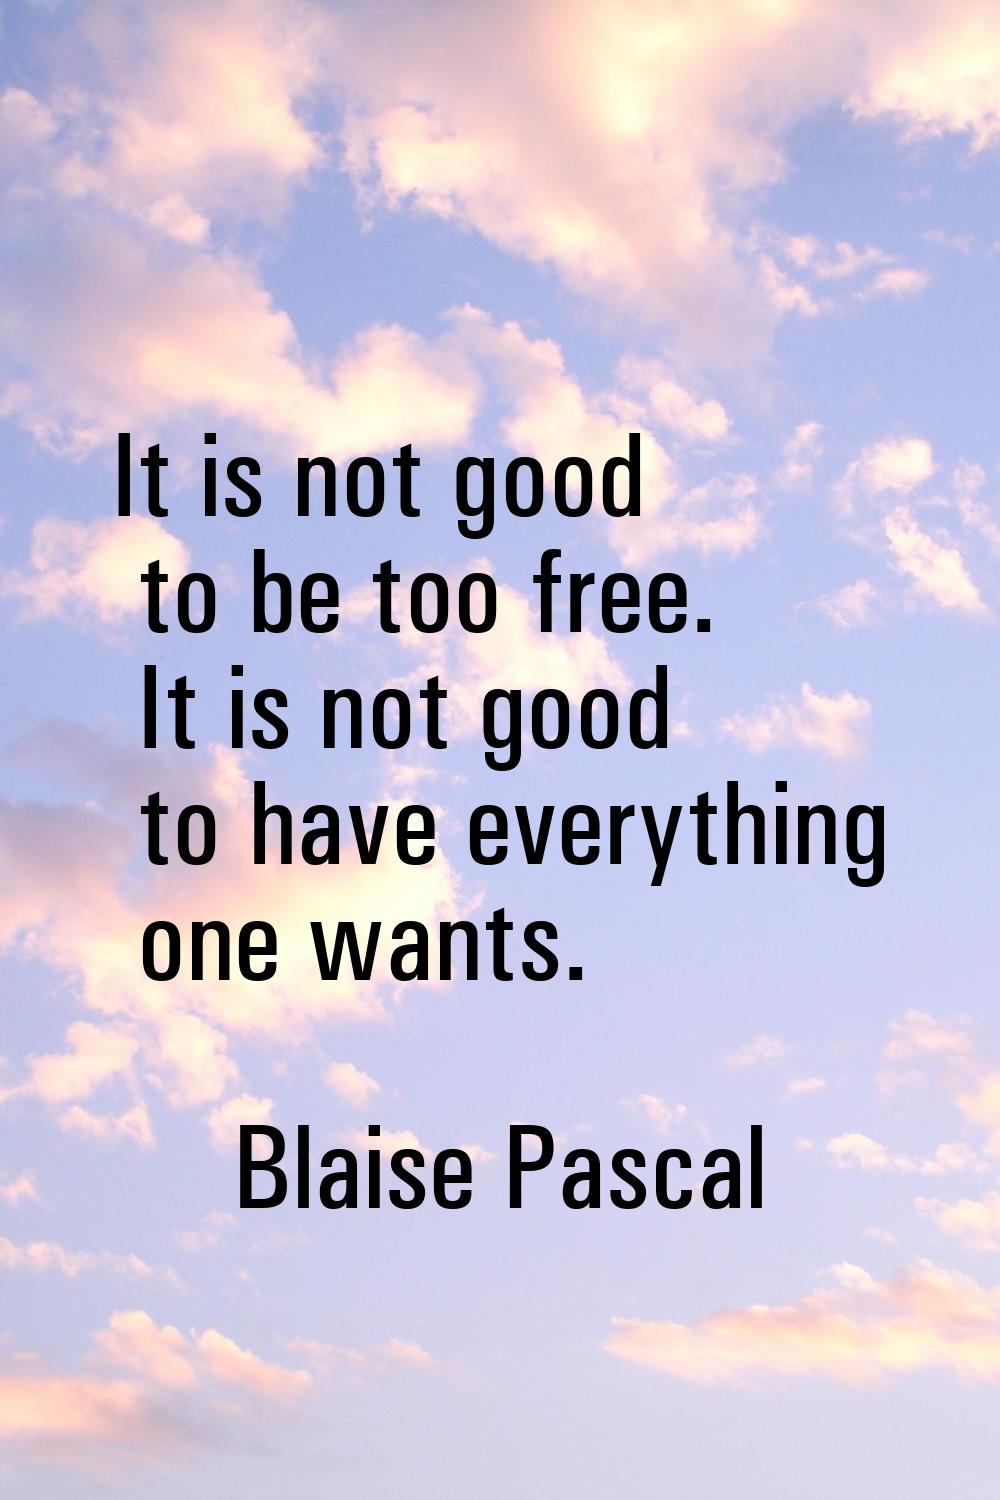 It is not good to be too free. It is not good to have everything one wants.